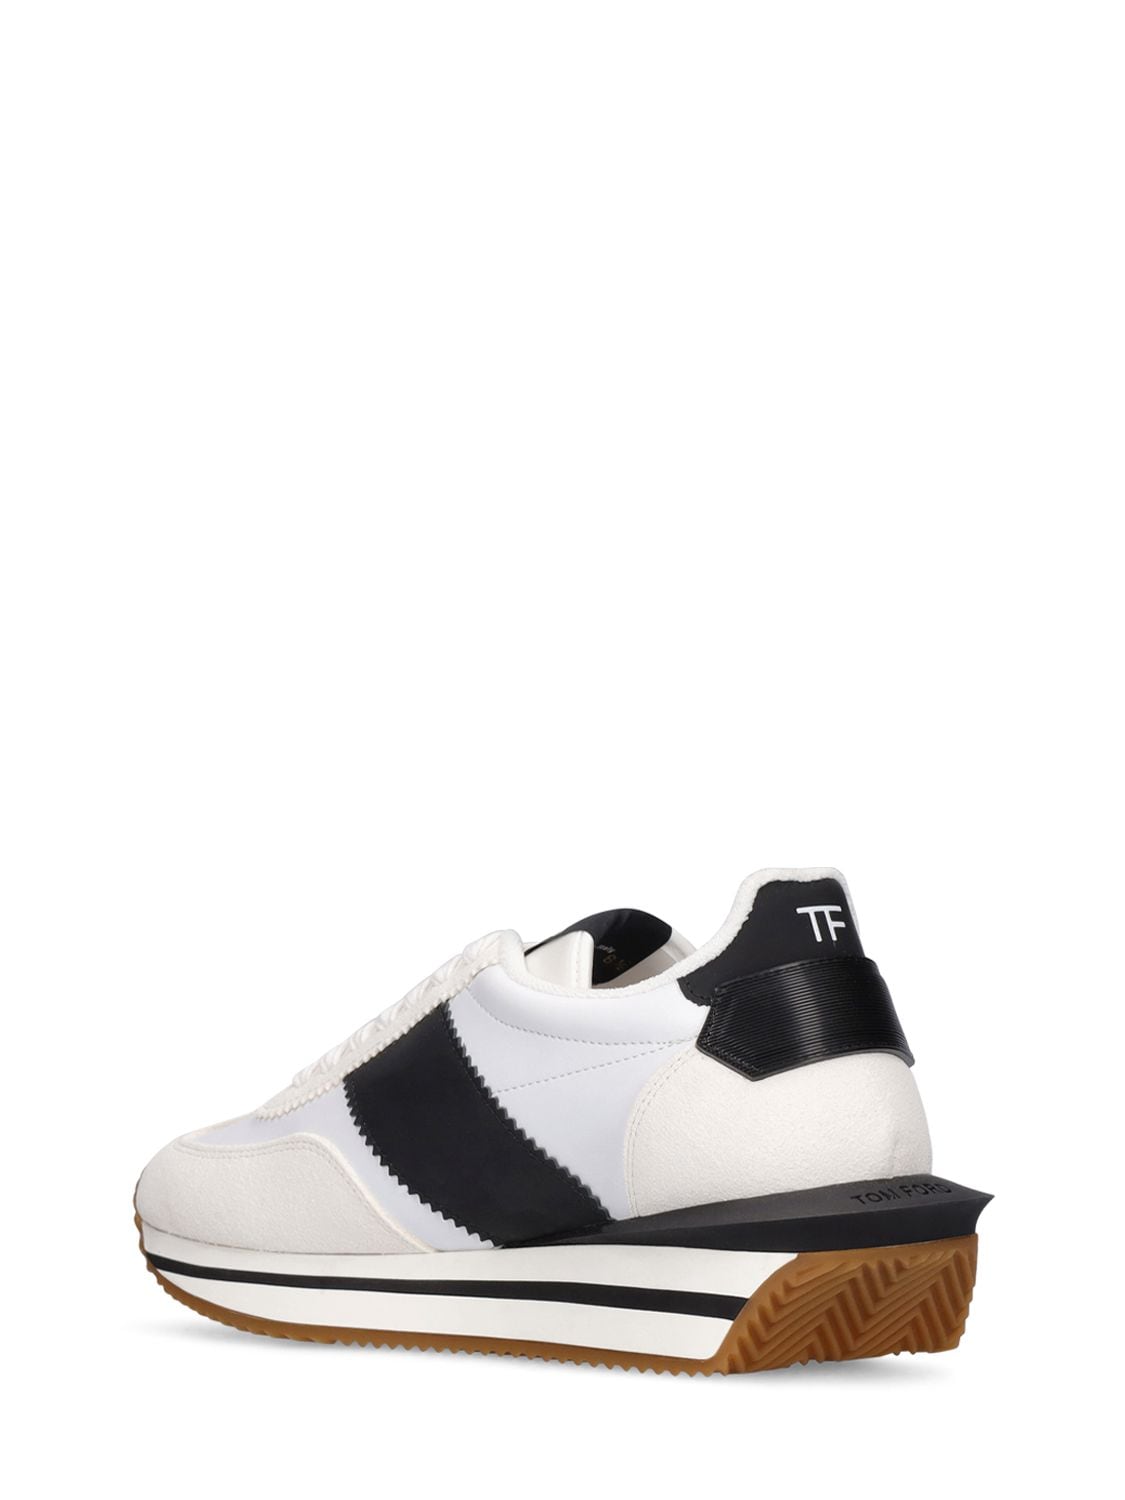 Shop Tom Ford Suede & Tech Low Top Sneakers In White,black